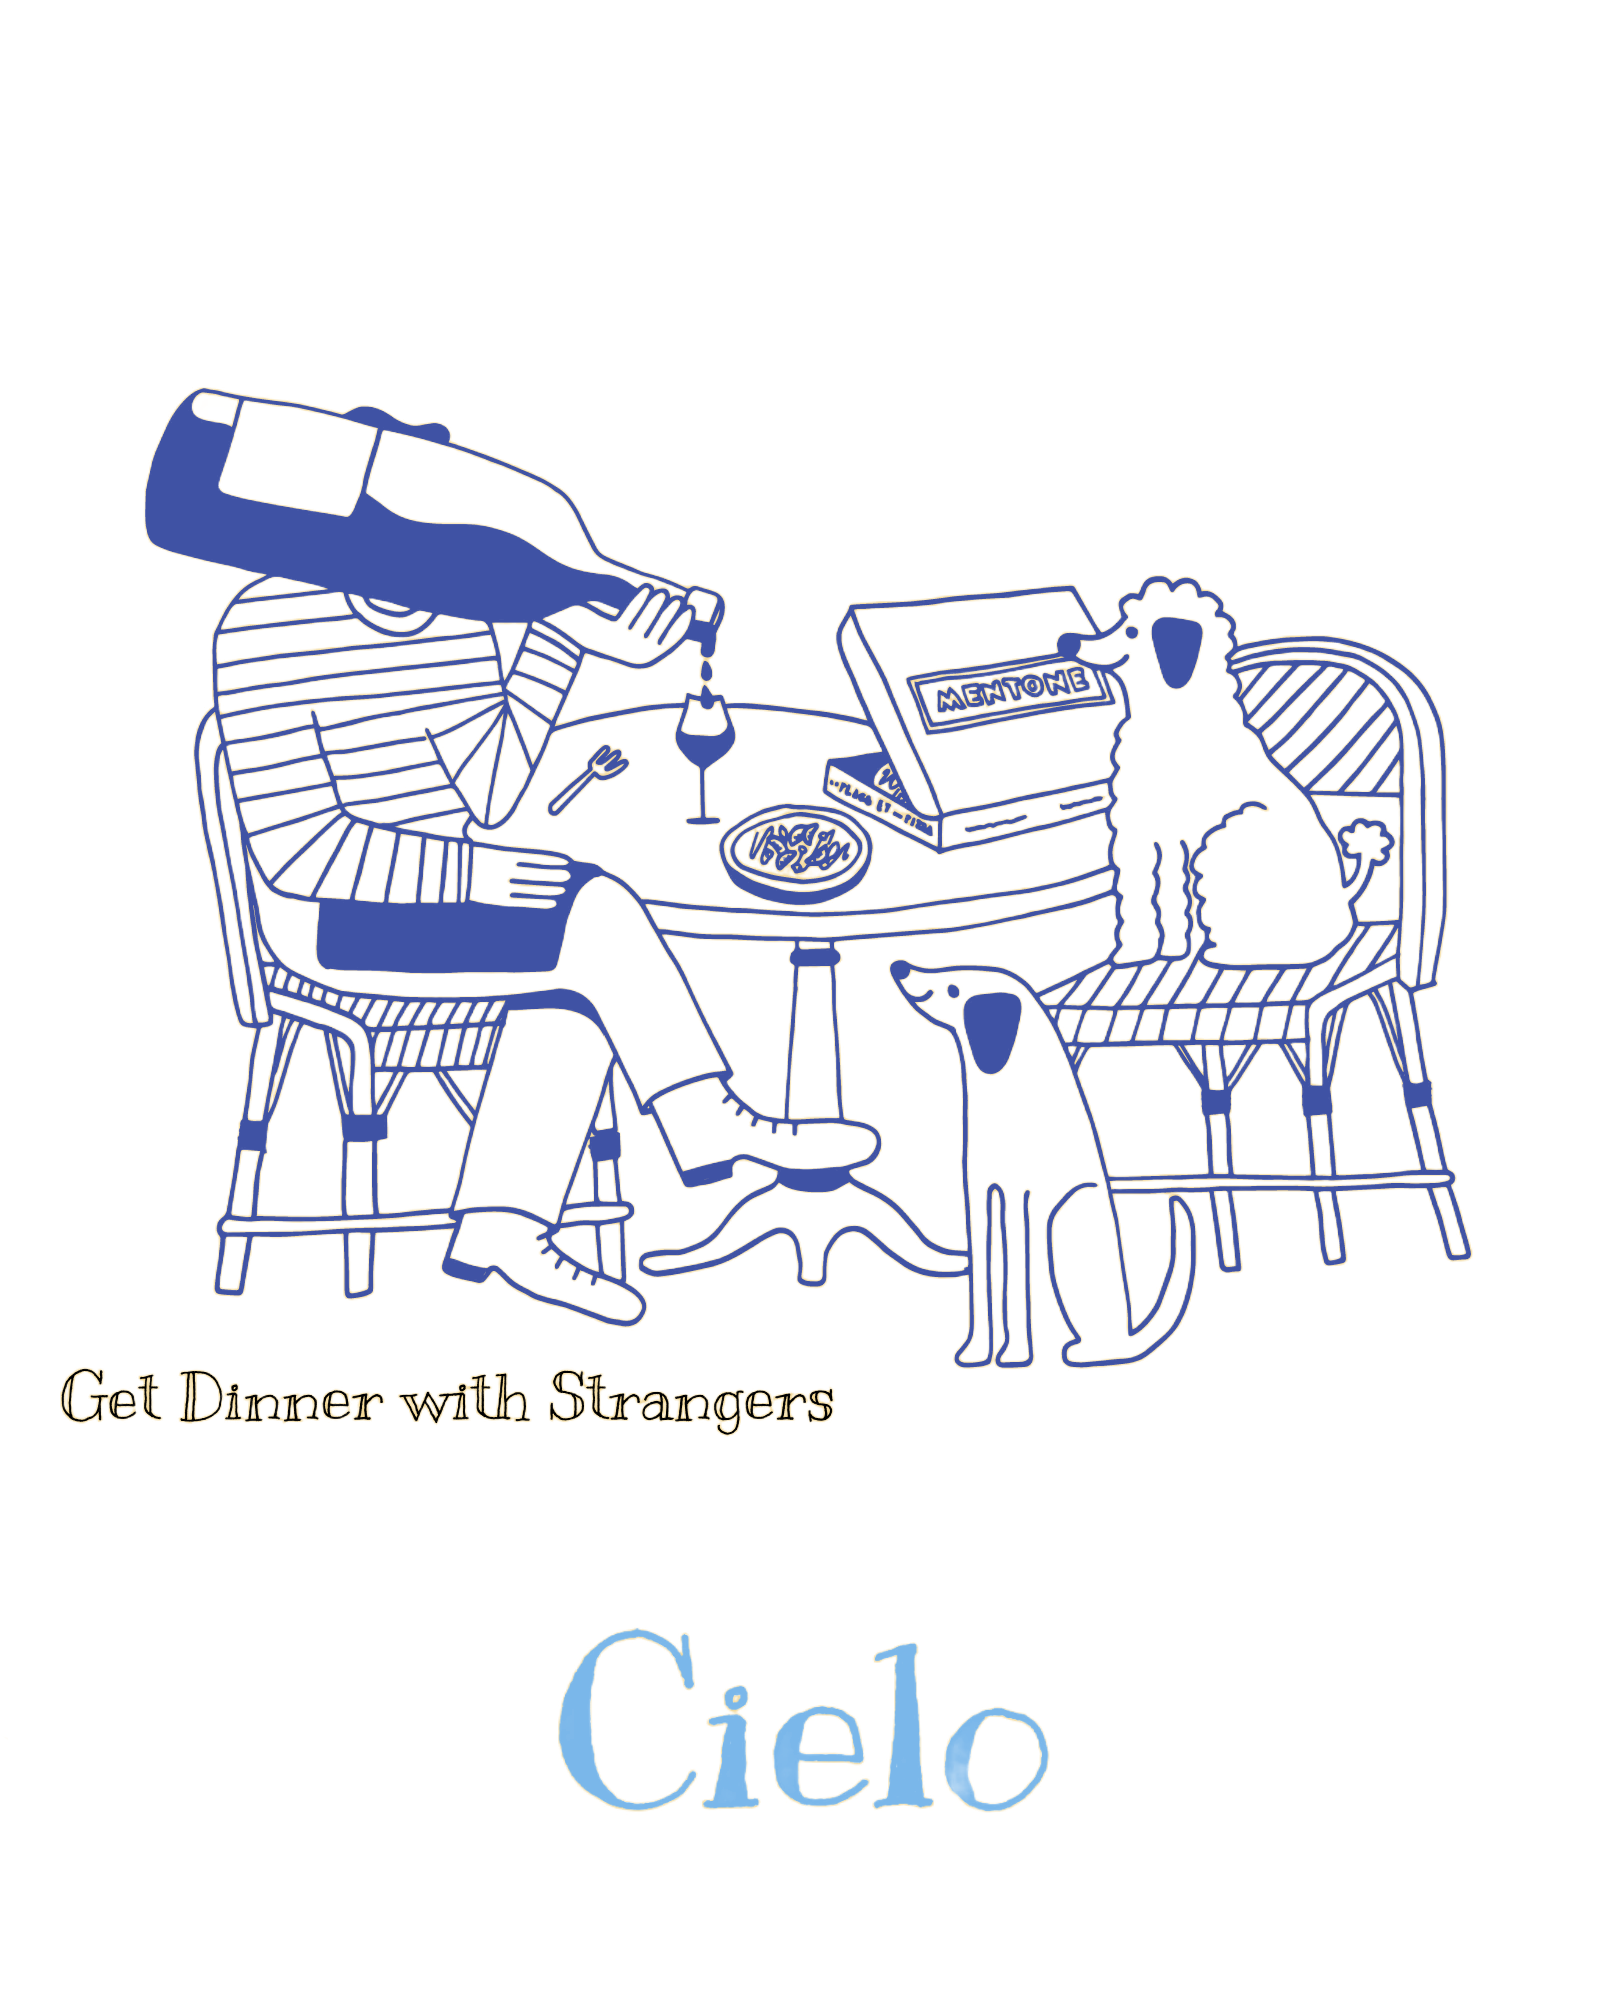 Cielo is an innovative social dining app that organizes dinners for individuals looking to meet new people, explore diverse cuisines, and expand their